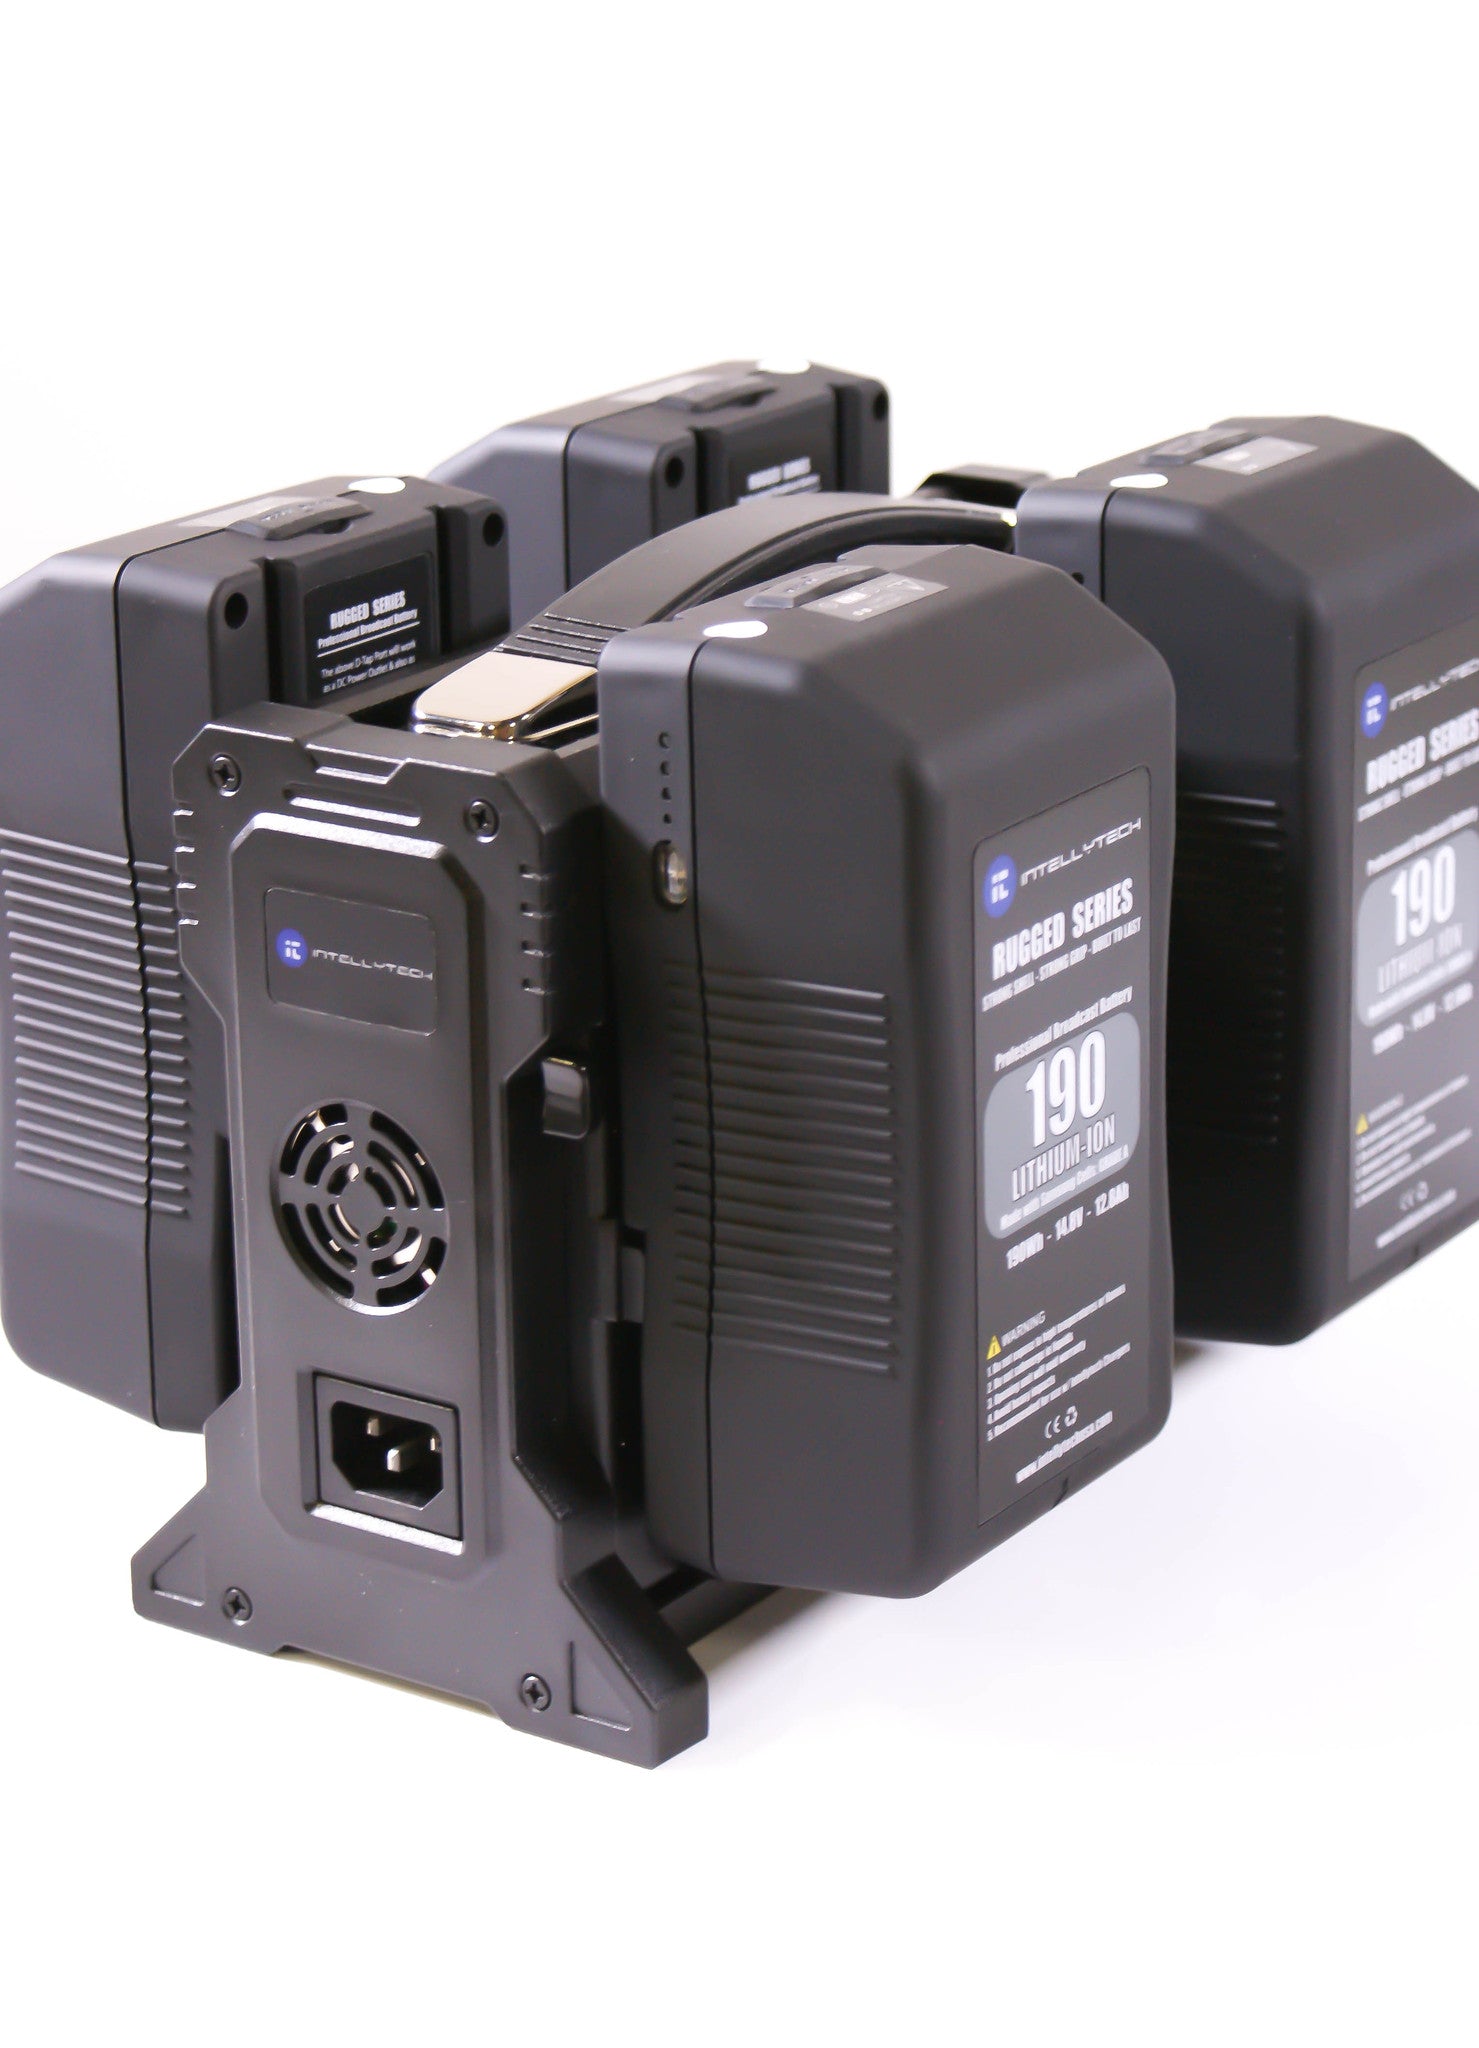 Rugged Series Kit - 4 x 190Wh Series Battery + Quad Charger. Gold Mount / V-Mount